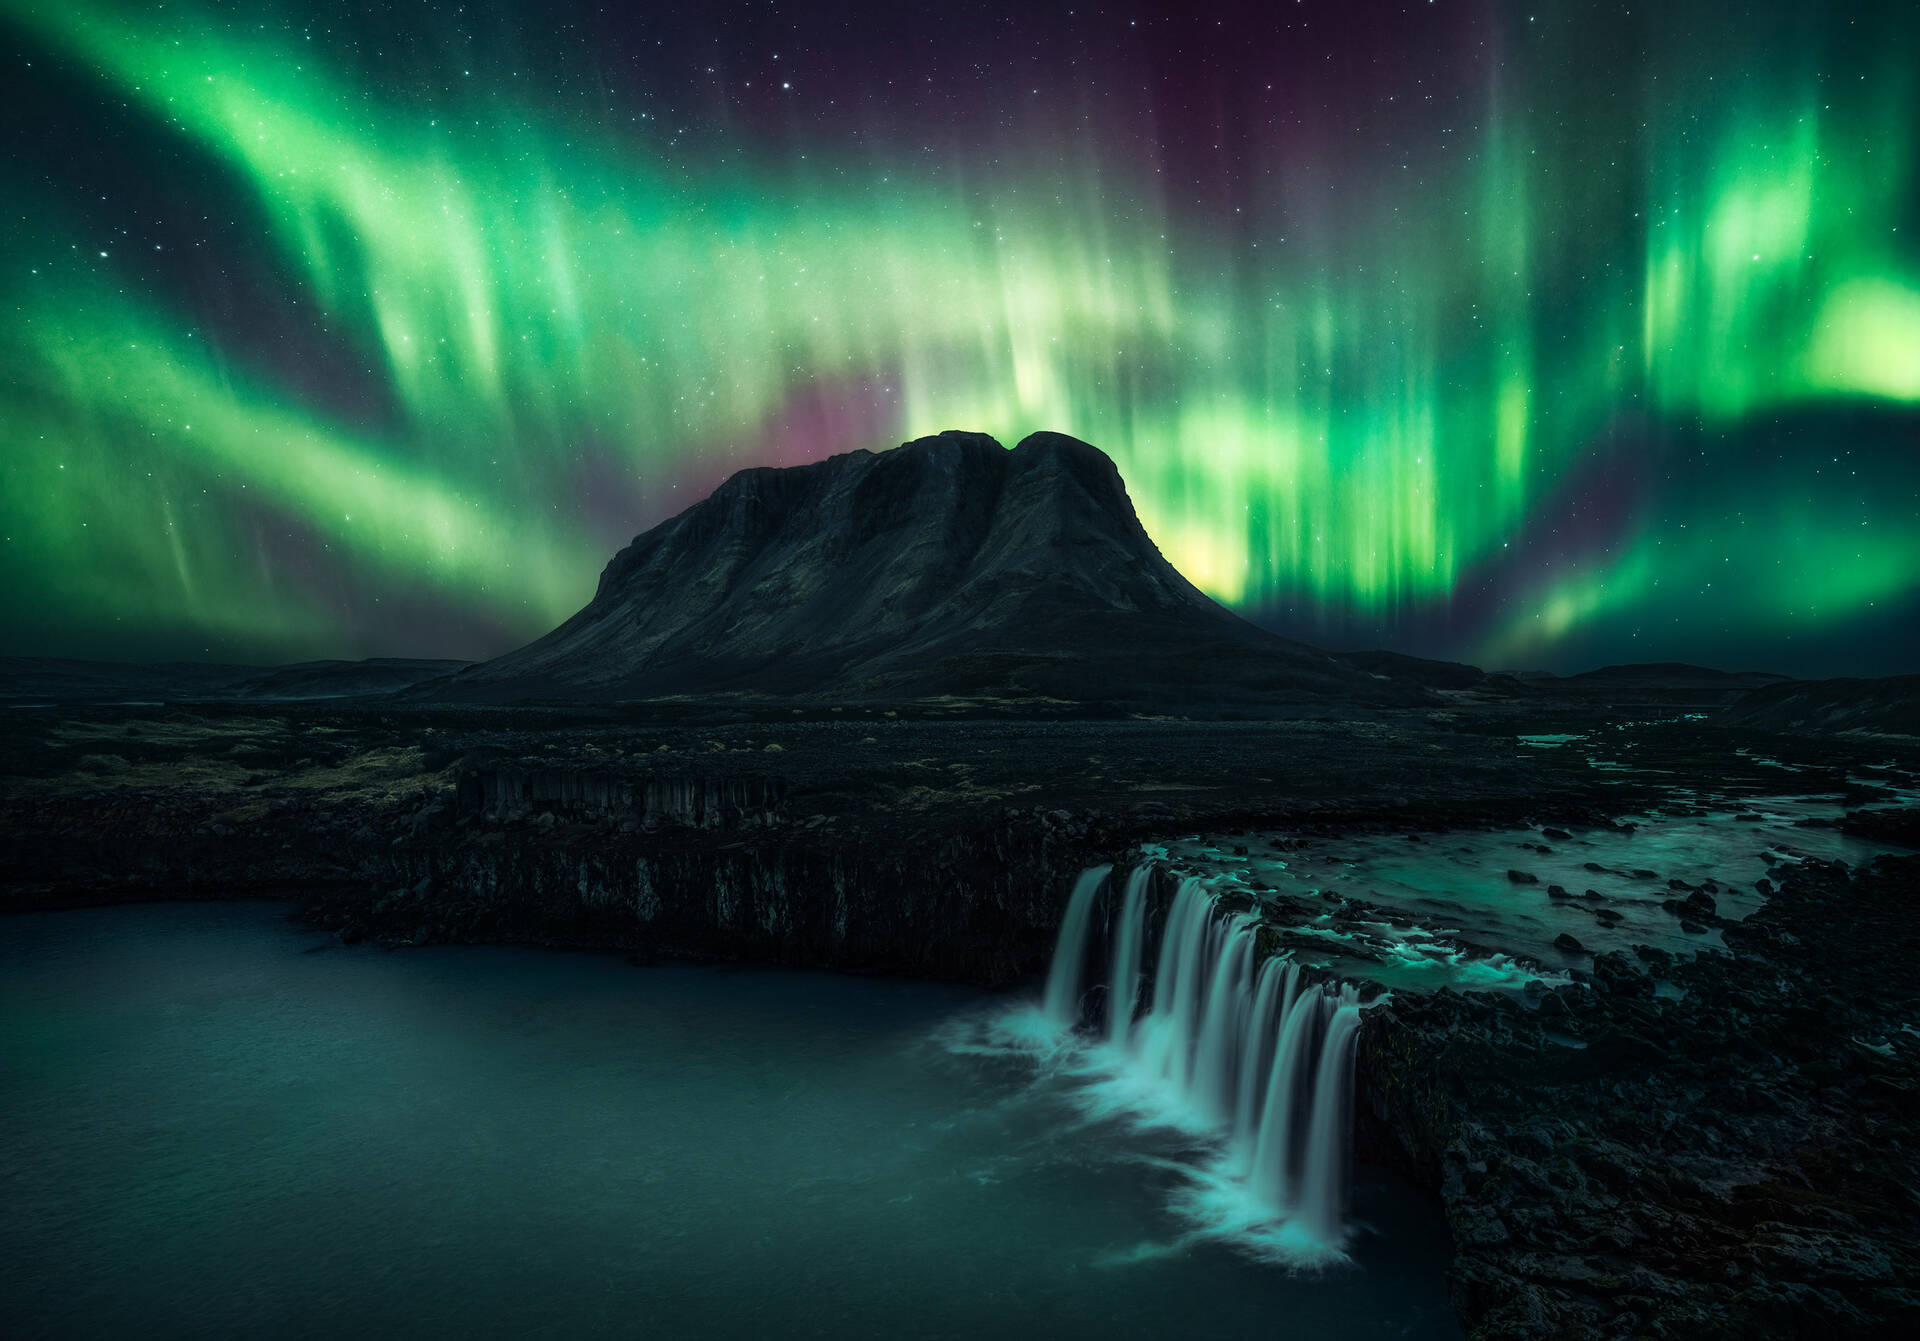 Northern Lights shining with bright green beams over mountain and waterfall